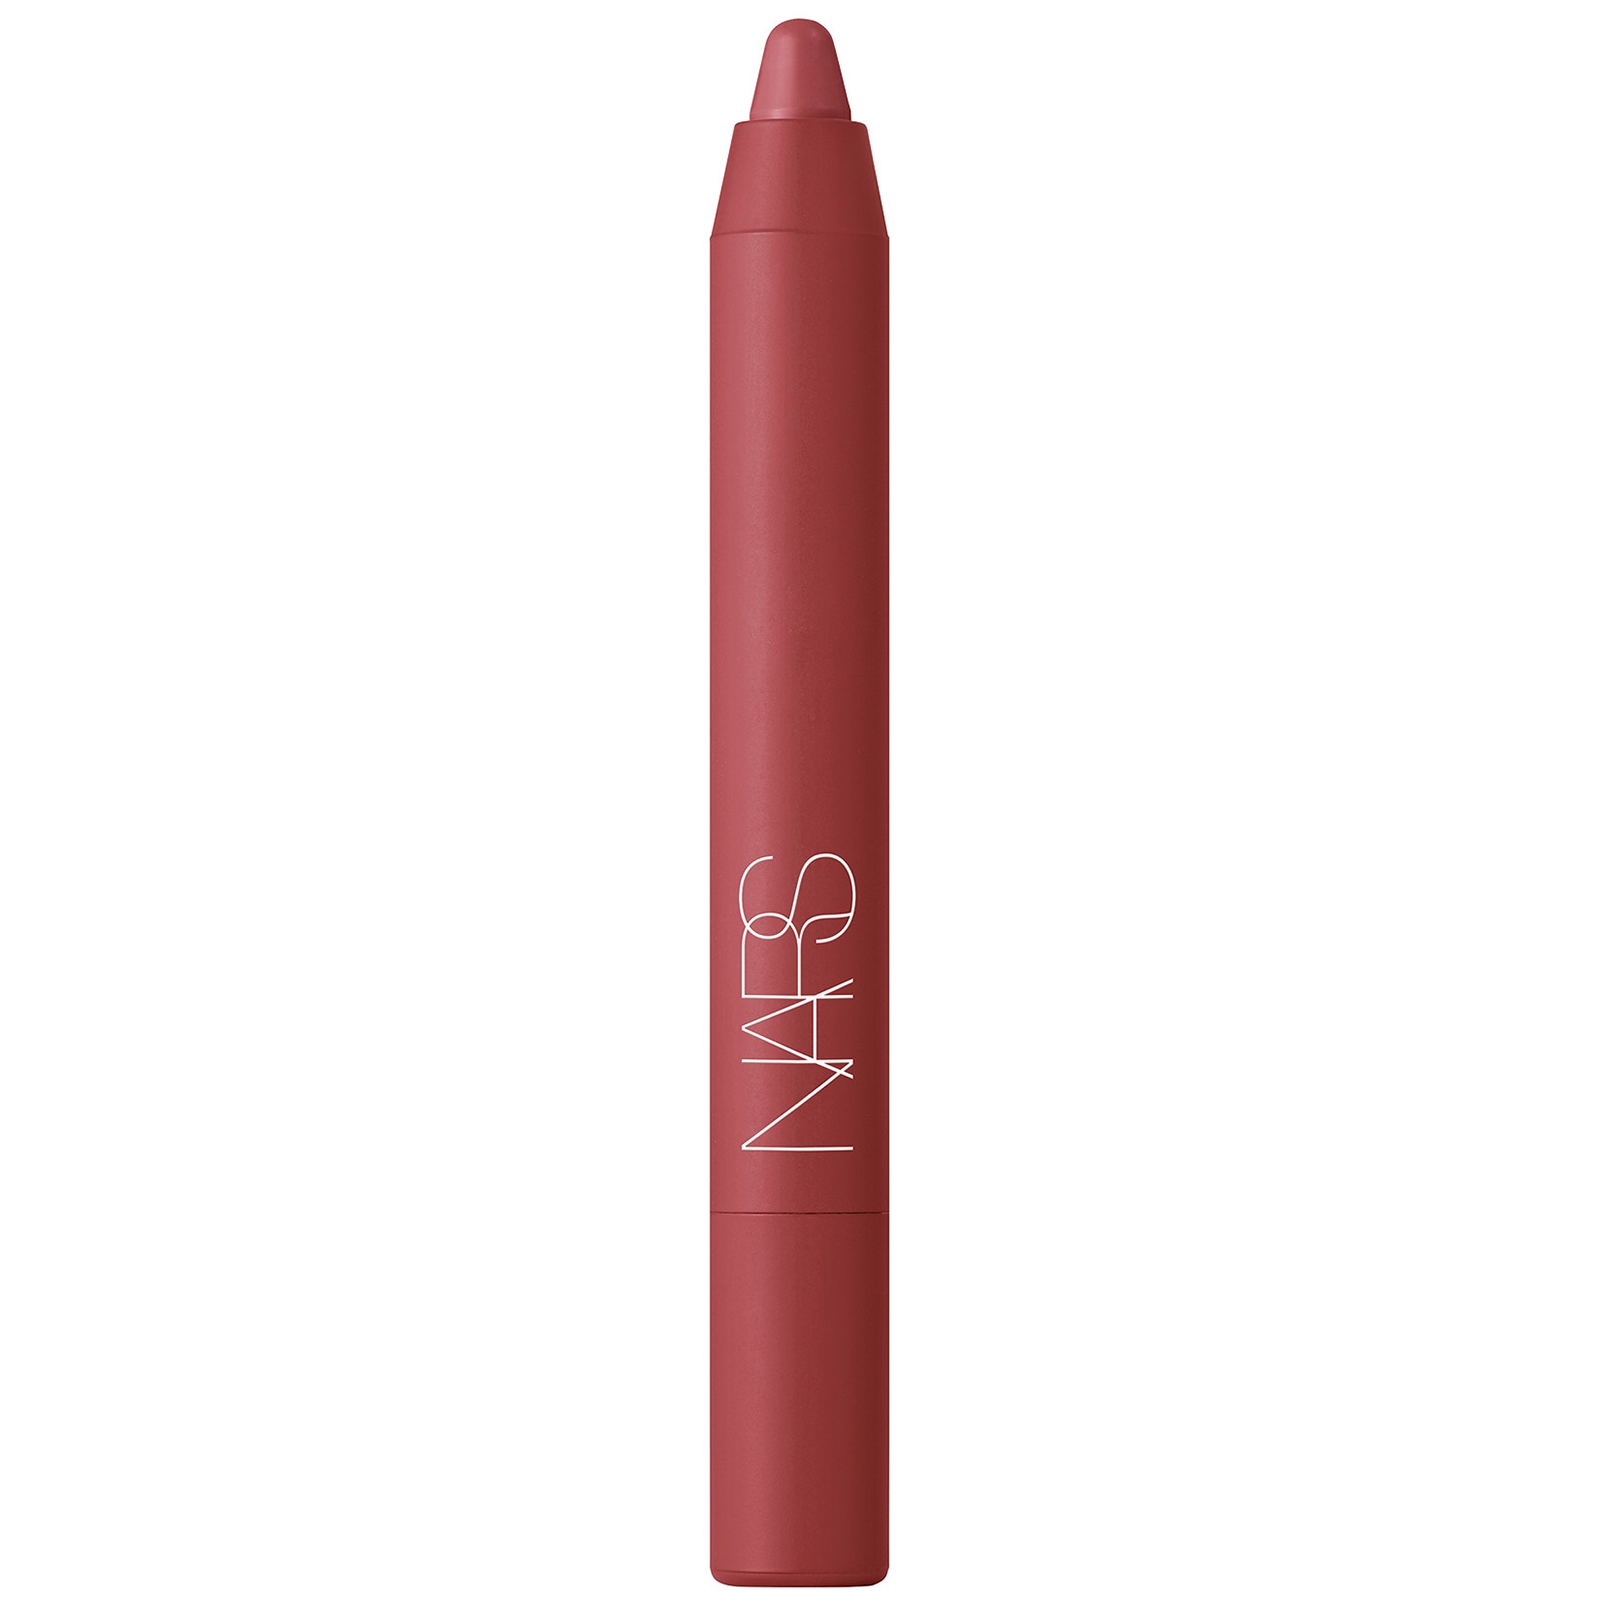 Nars High Intensity Lip Pencil 2.6g (various Shades) - Endless Love In White